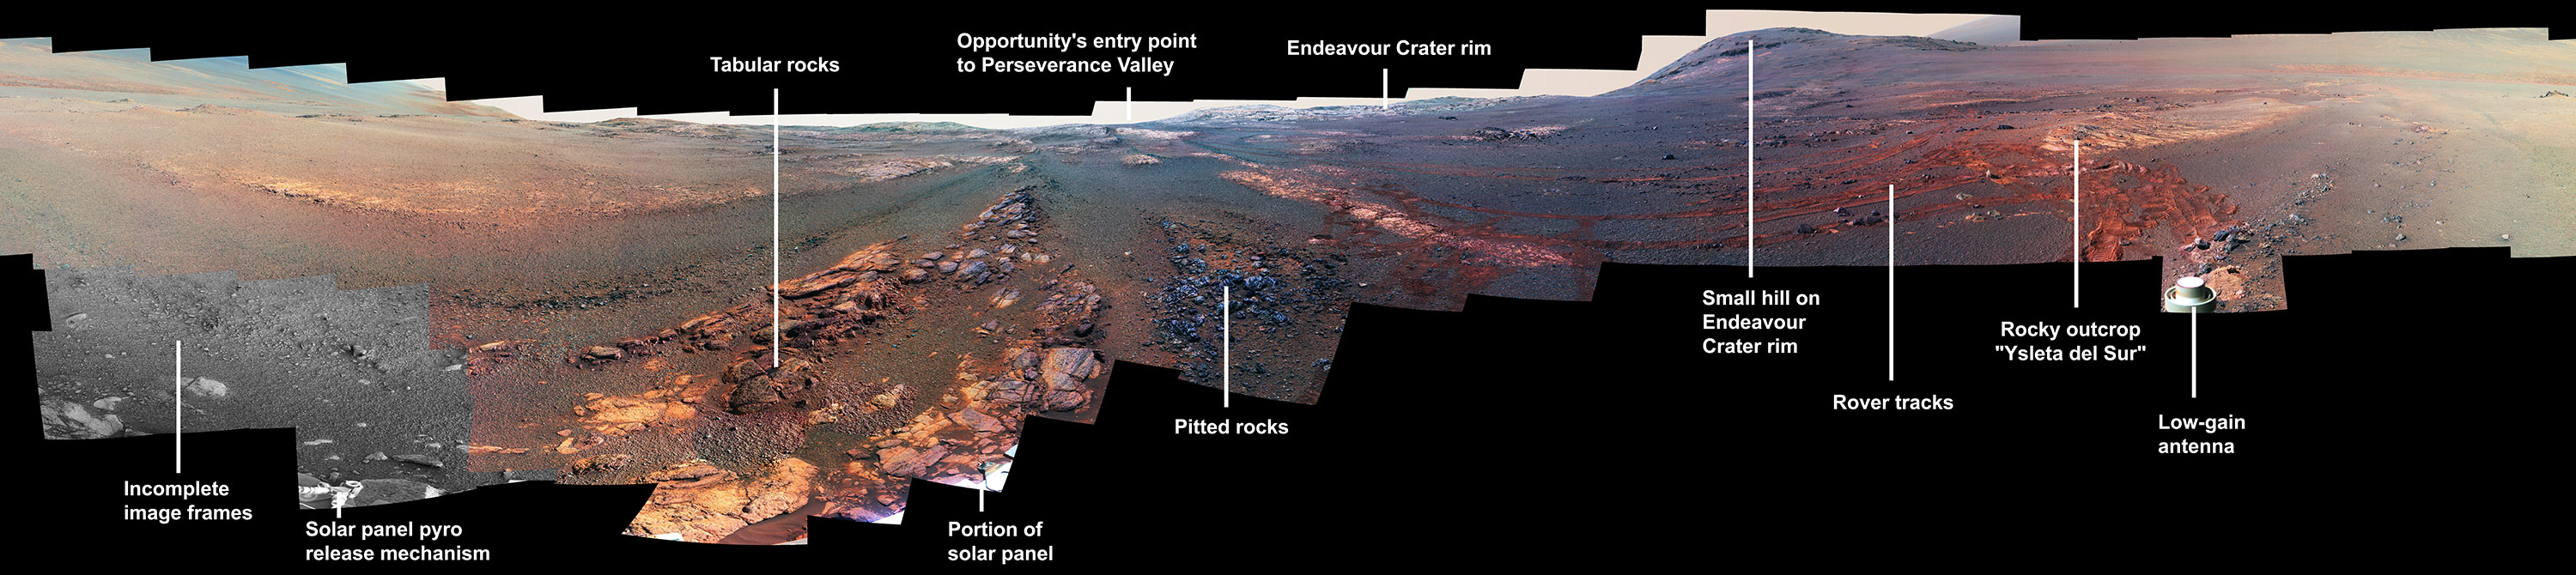 Opportunity’s last Mars panorama is a showstopper